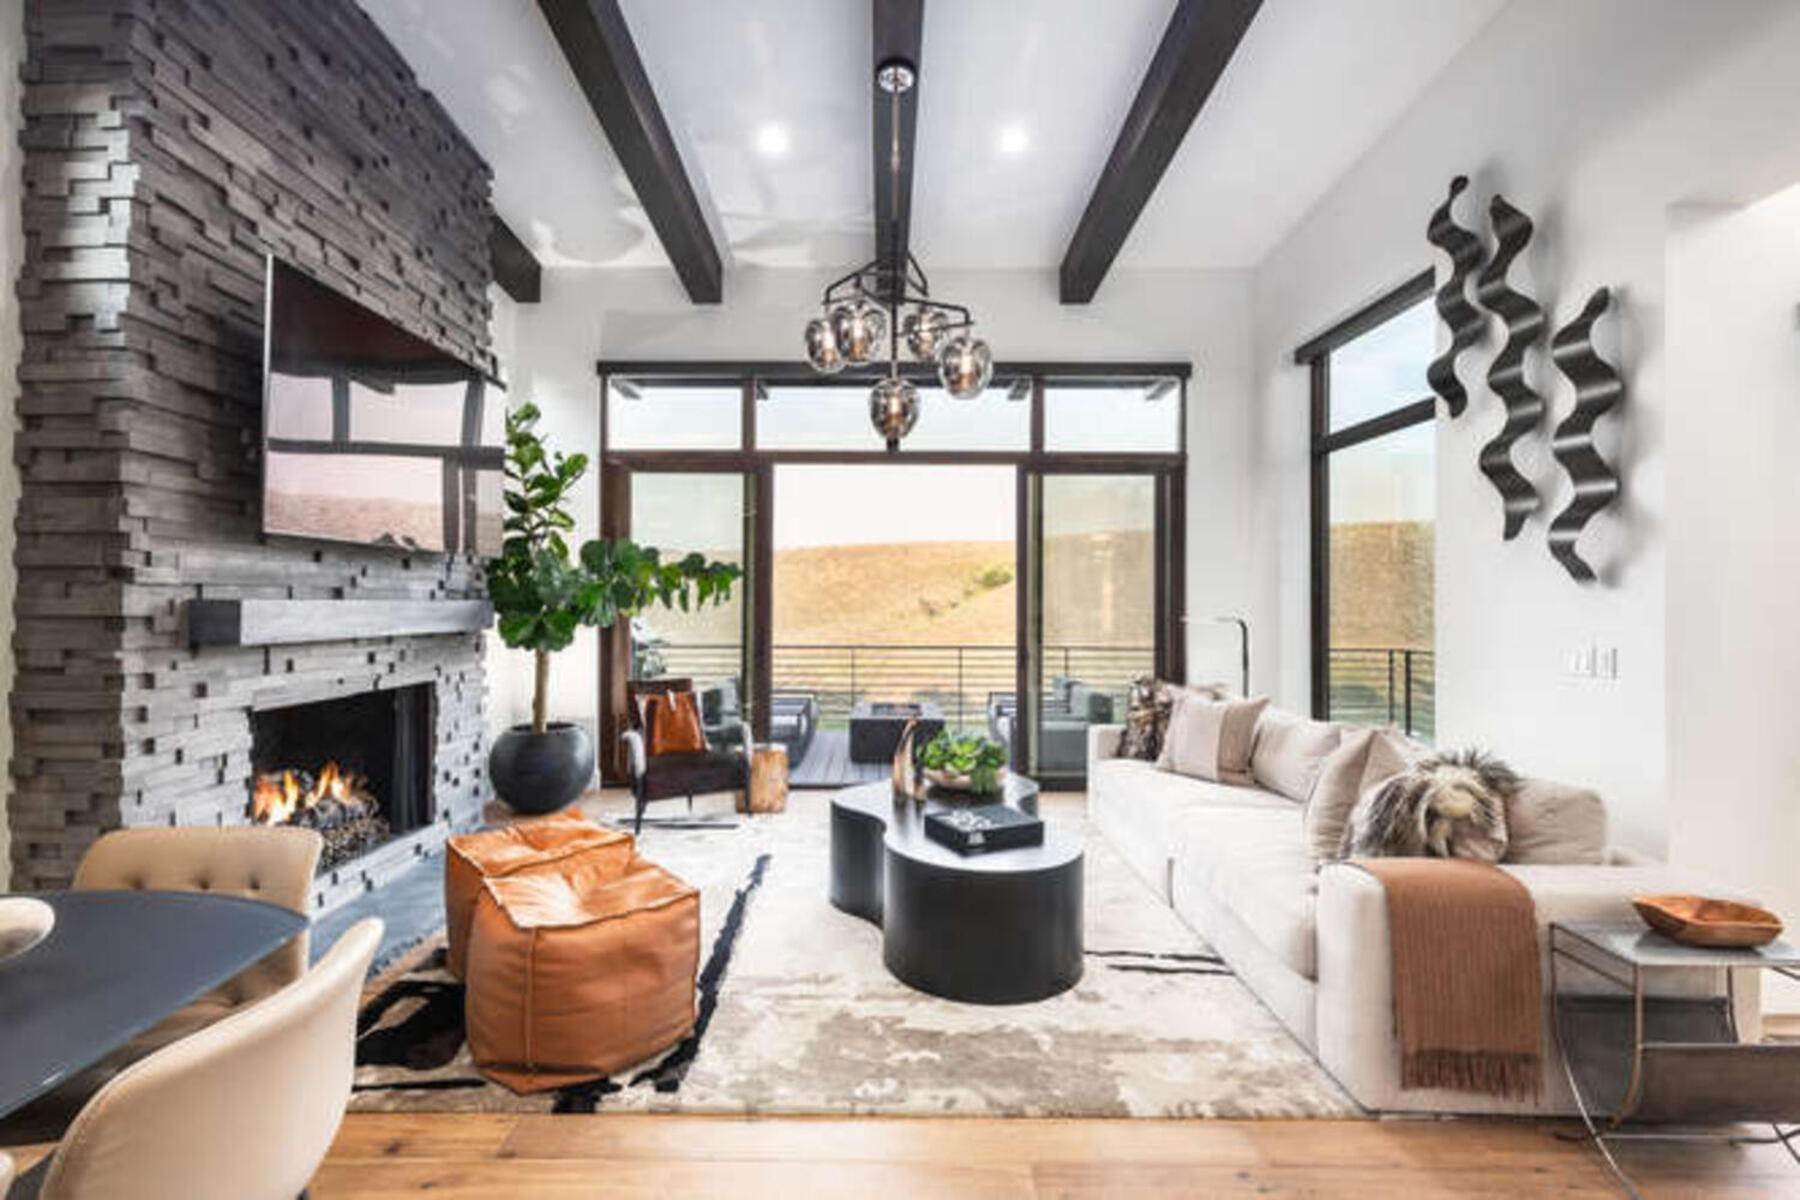 5. Single Family Homes for Sale at Custom Turnkey Home in Promontory’s Nicklaus Village 6768 Golden Bear Loop West Park City, Utah 84098 United States